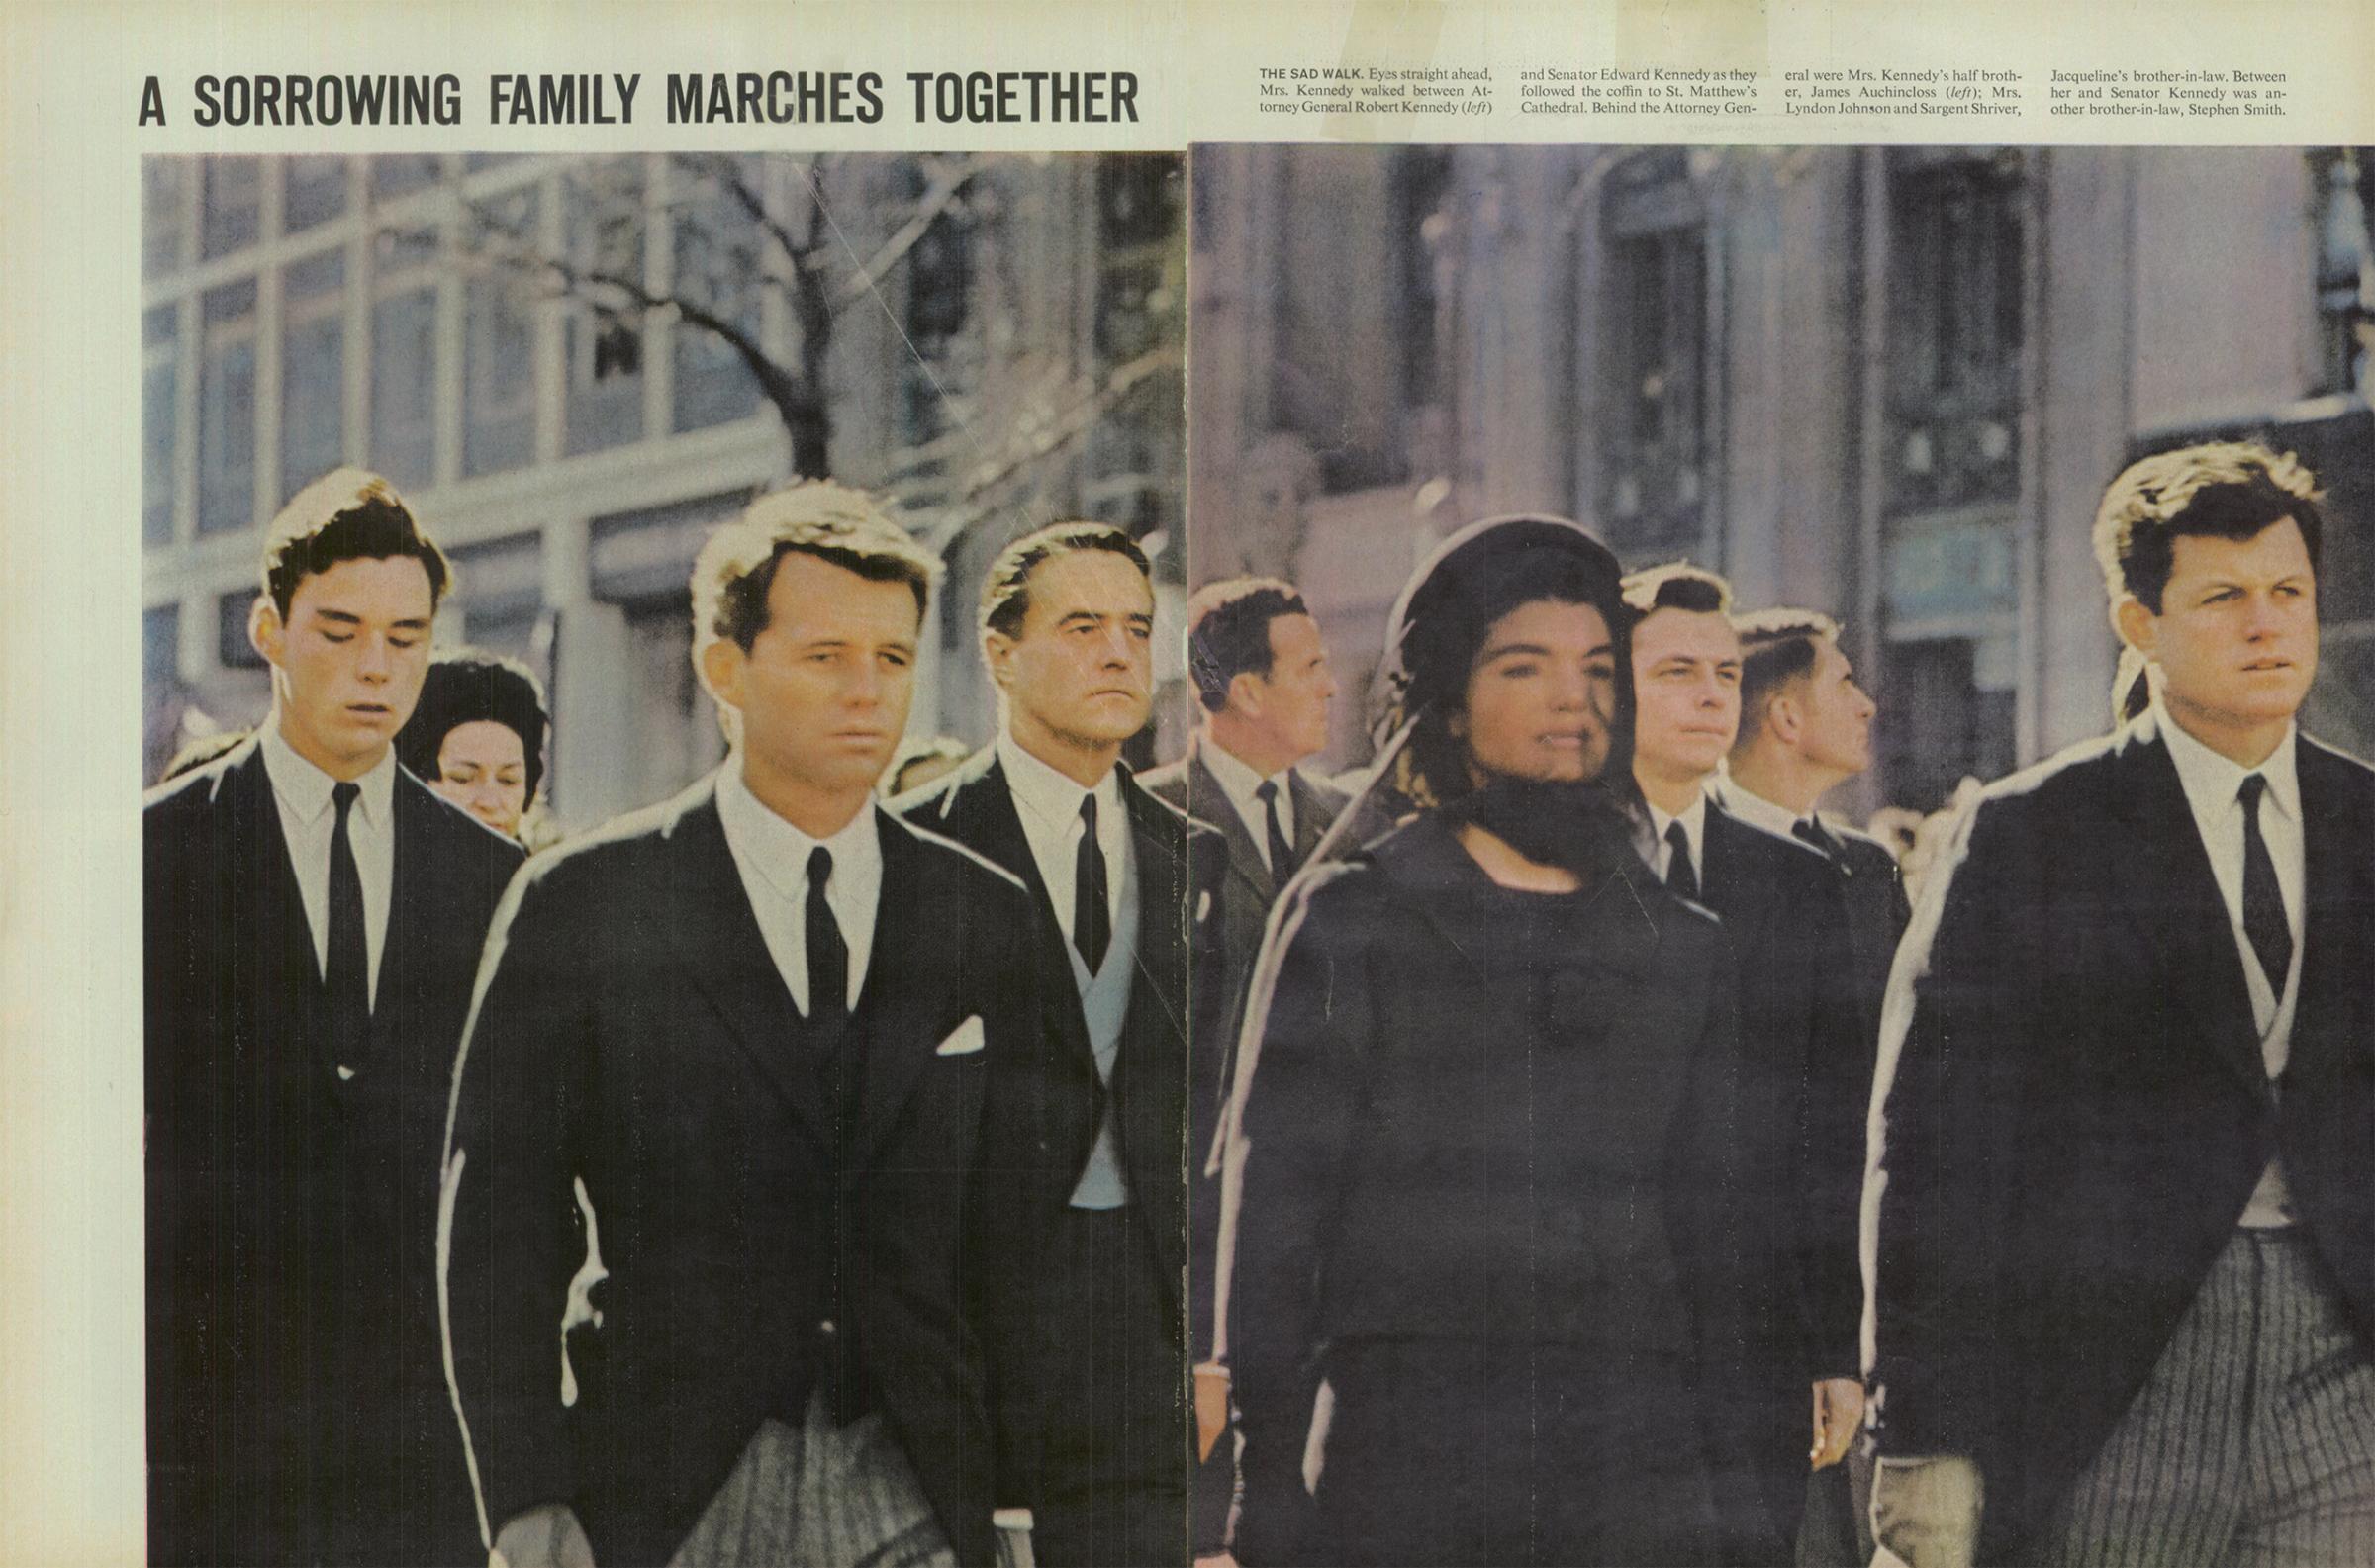 From the December 6, 1963 issue of LIFE magazine.